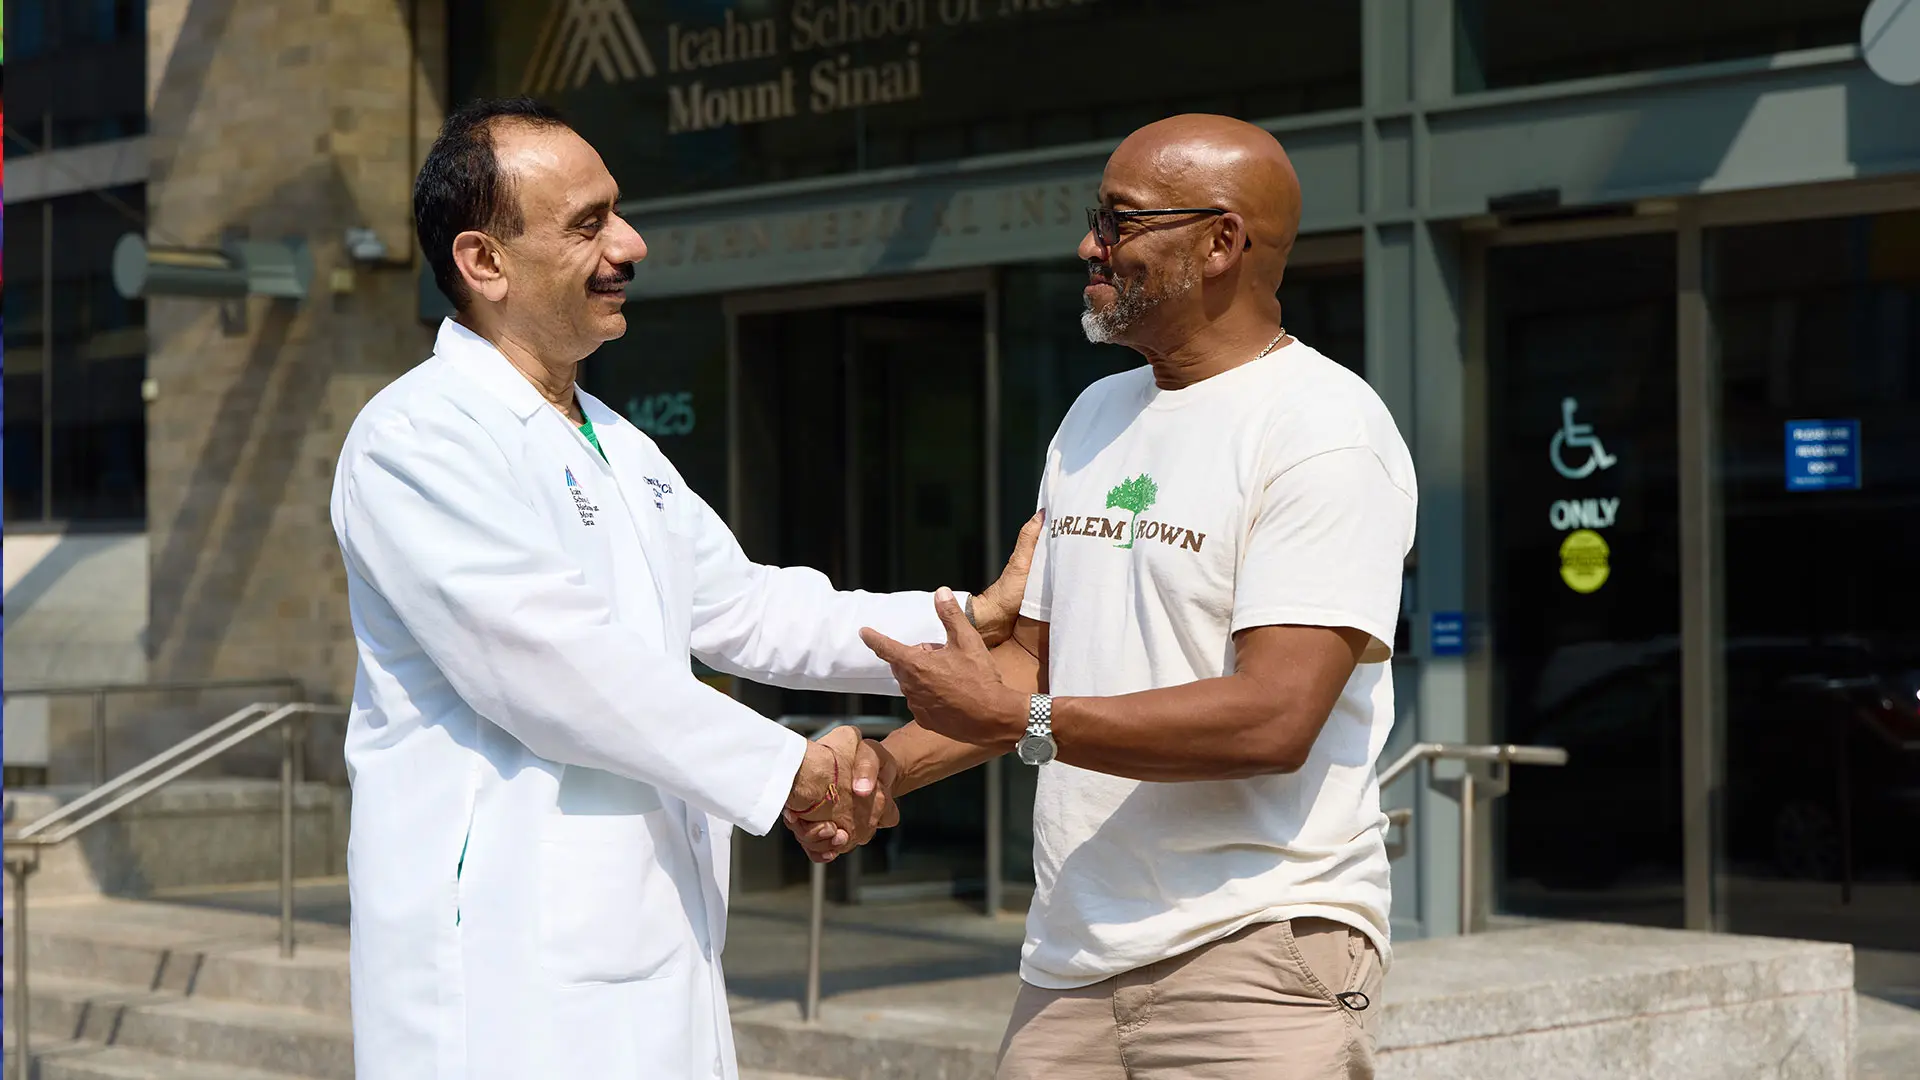 Tony Hillery, right, Founder and CEO of Harlem Grown, noticed his PSA levels steadily rising  over the years. He decided to see Ash Tewari, MBBS, MCh, FRCS (Hon.), who determined he had prostate cancer. 